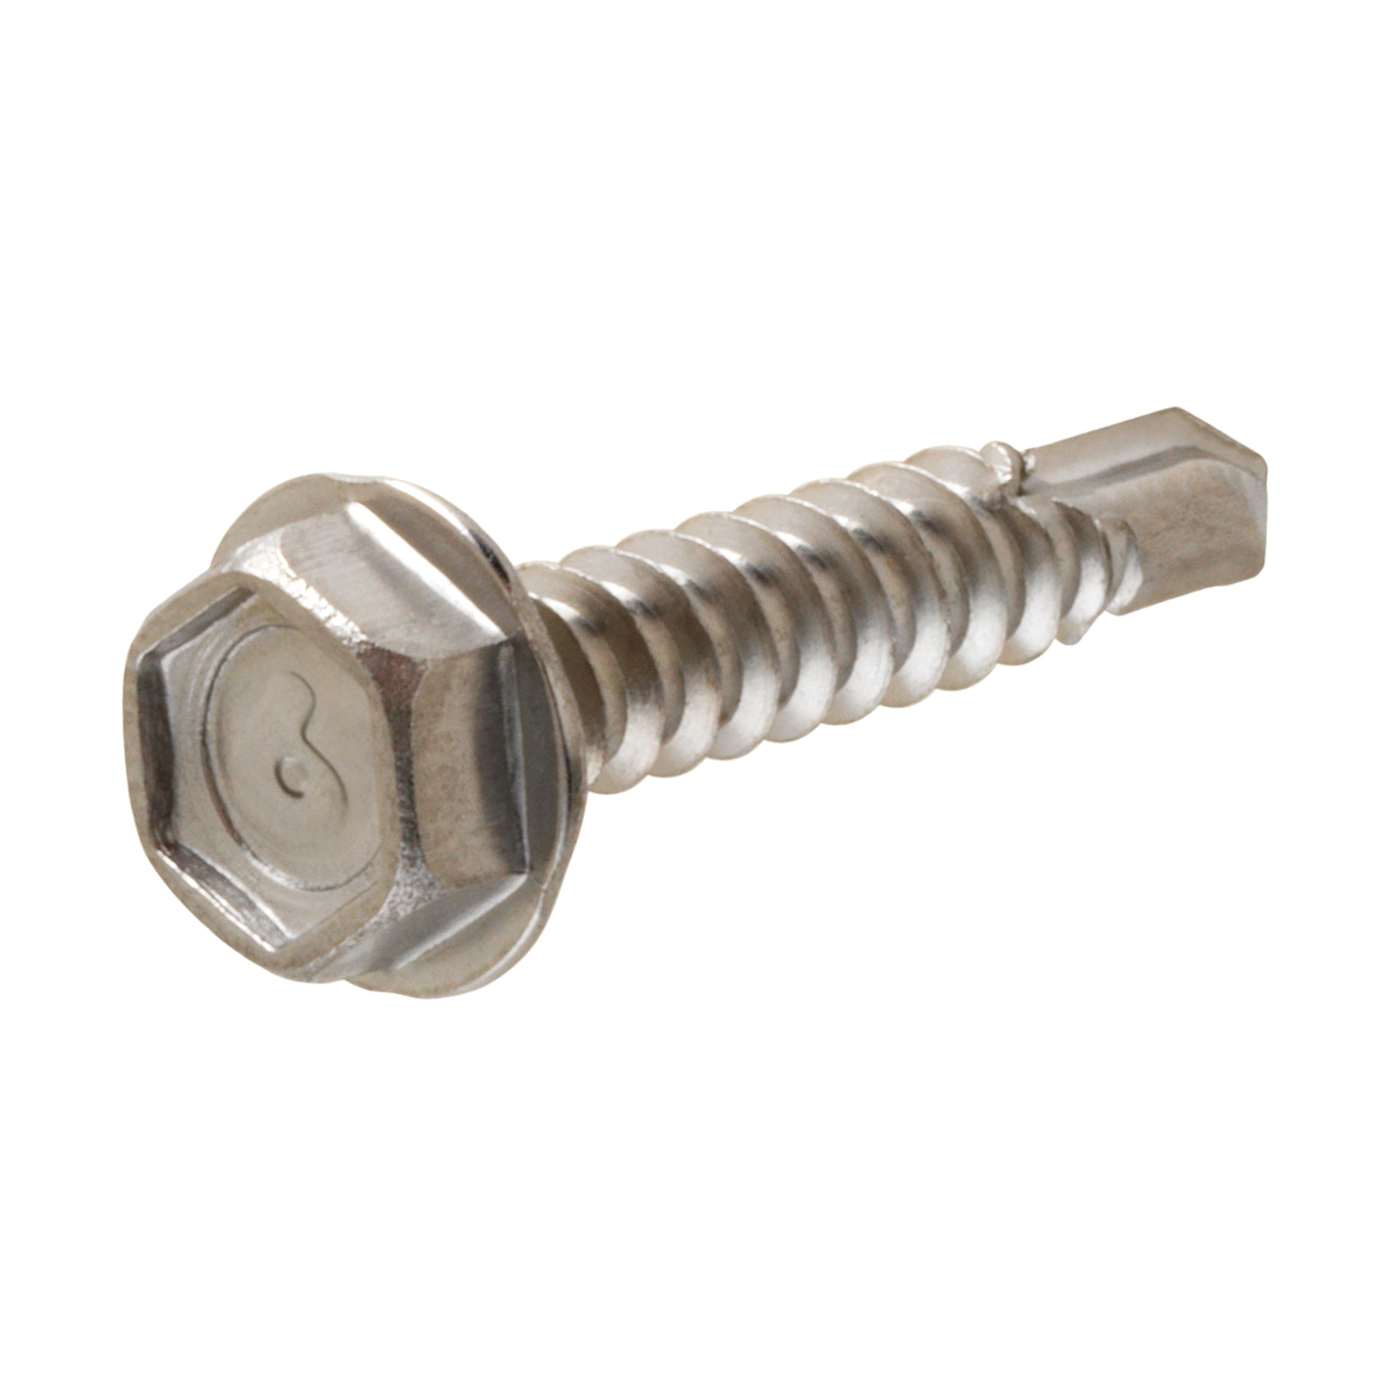 881833 Screw, #8 Thread, 1/2 in L, Washer Head, Hex Drive, Self-Drilling Point, Stainless Steel